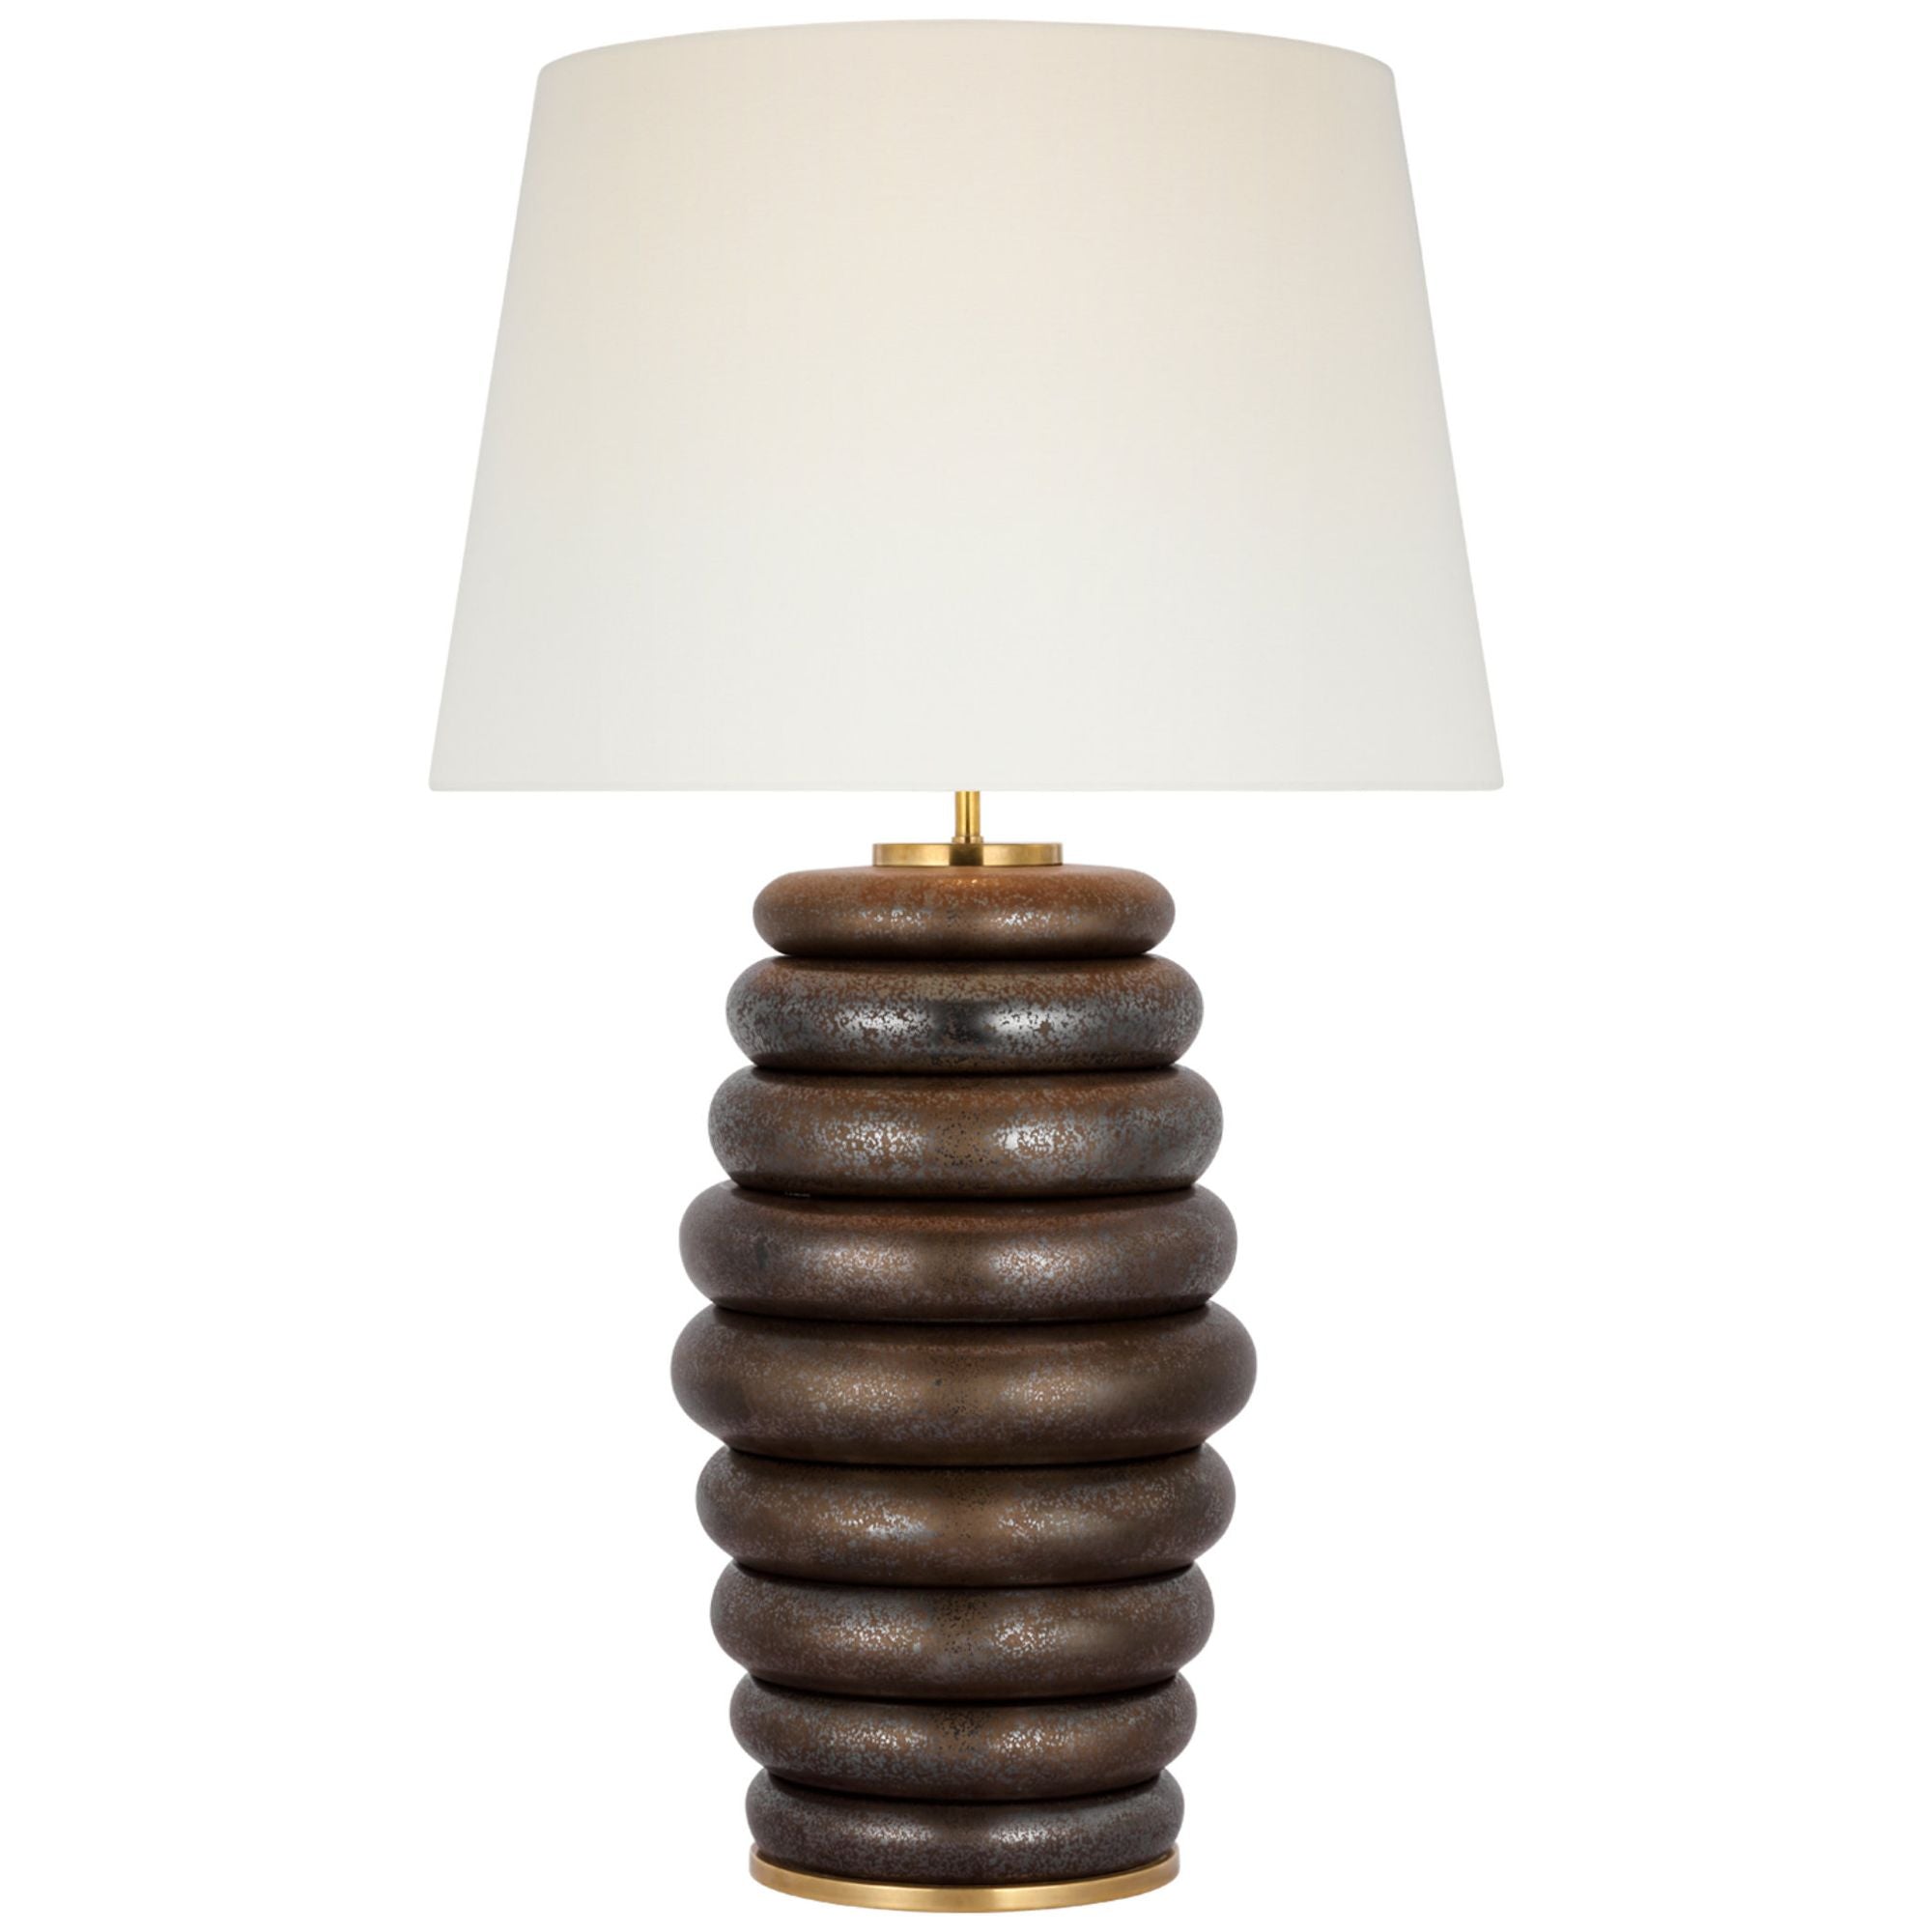 Kelly Wearstler Phoebe Extra Large Stacked Table Lamp in Crystal Bronze with Linen Shade